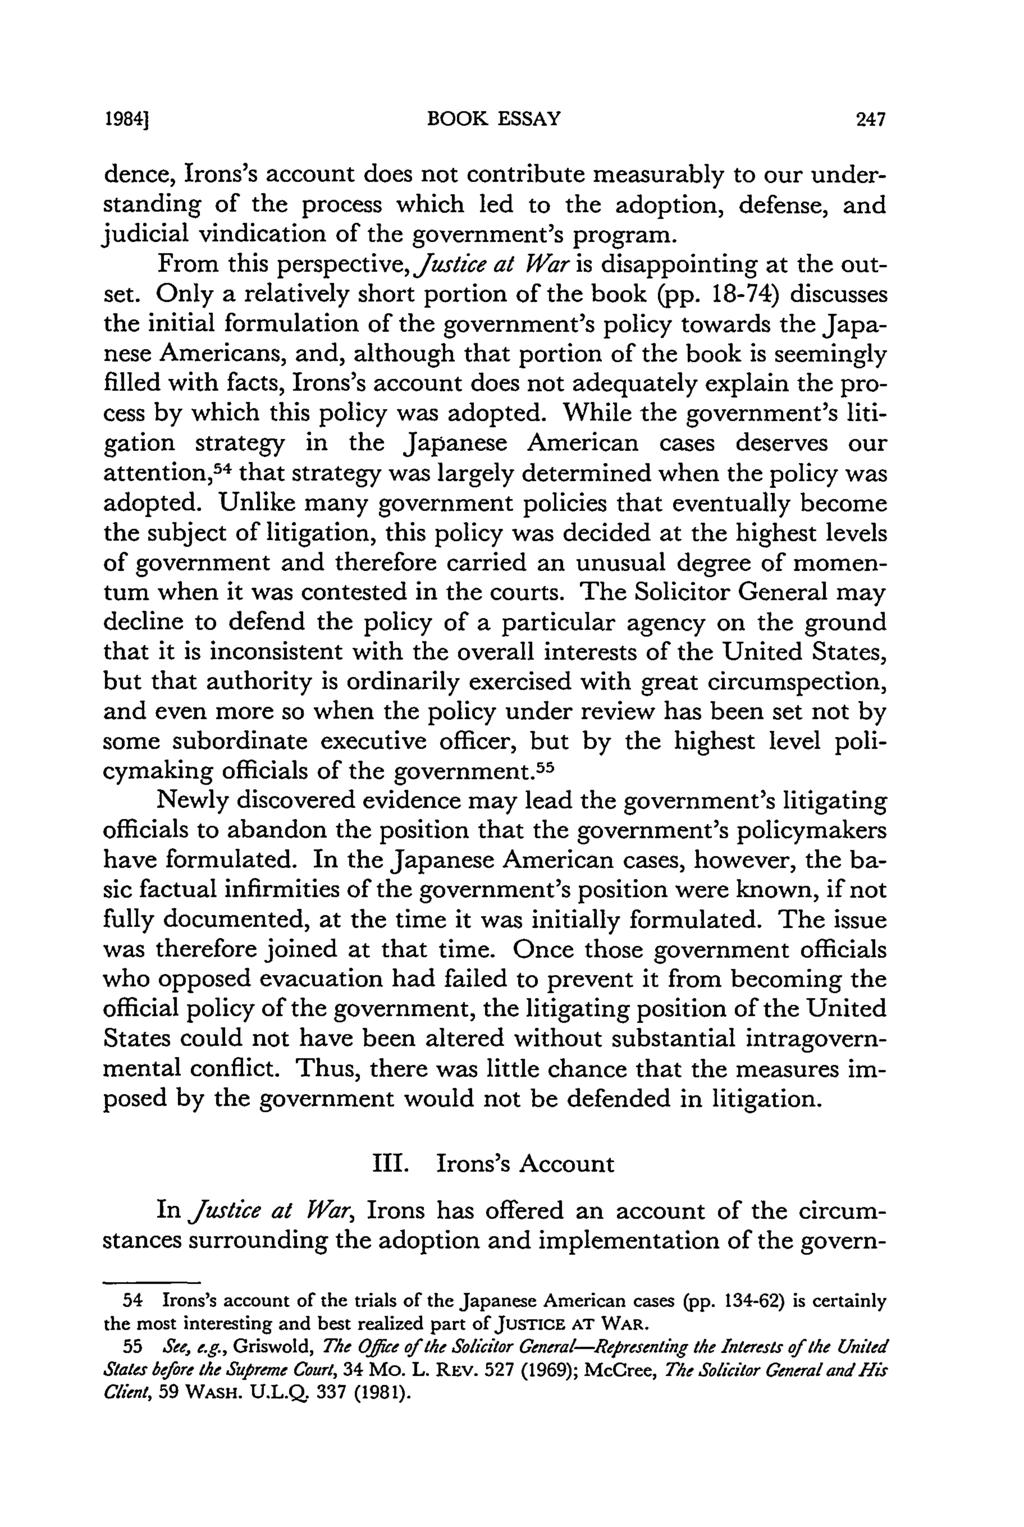 19841 BOOK ESSAY dence, Irons's account does not contribute measurably to our understanding of the process which led to the adoption, defense, and judicial vindication of the government's program.